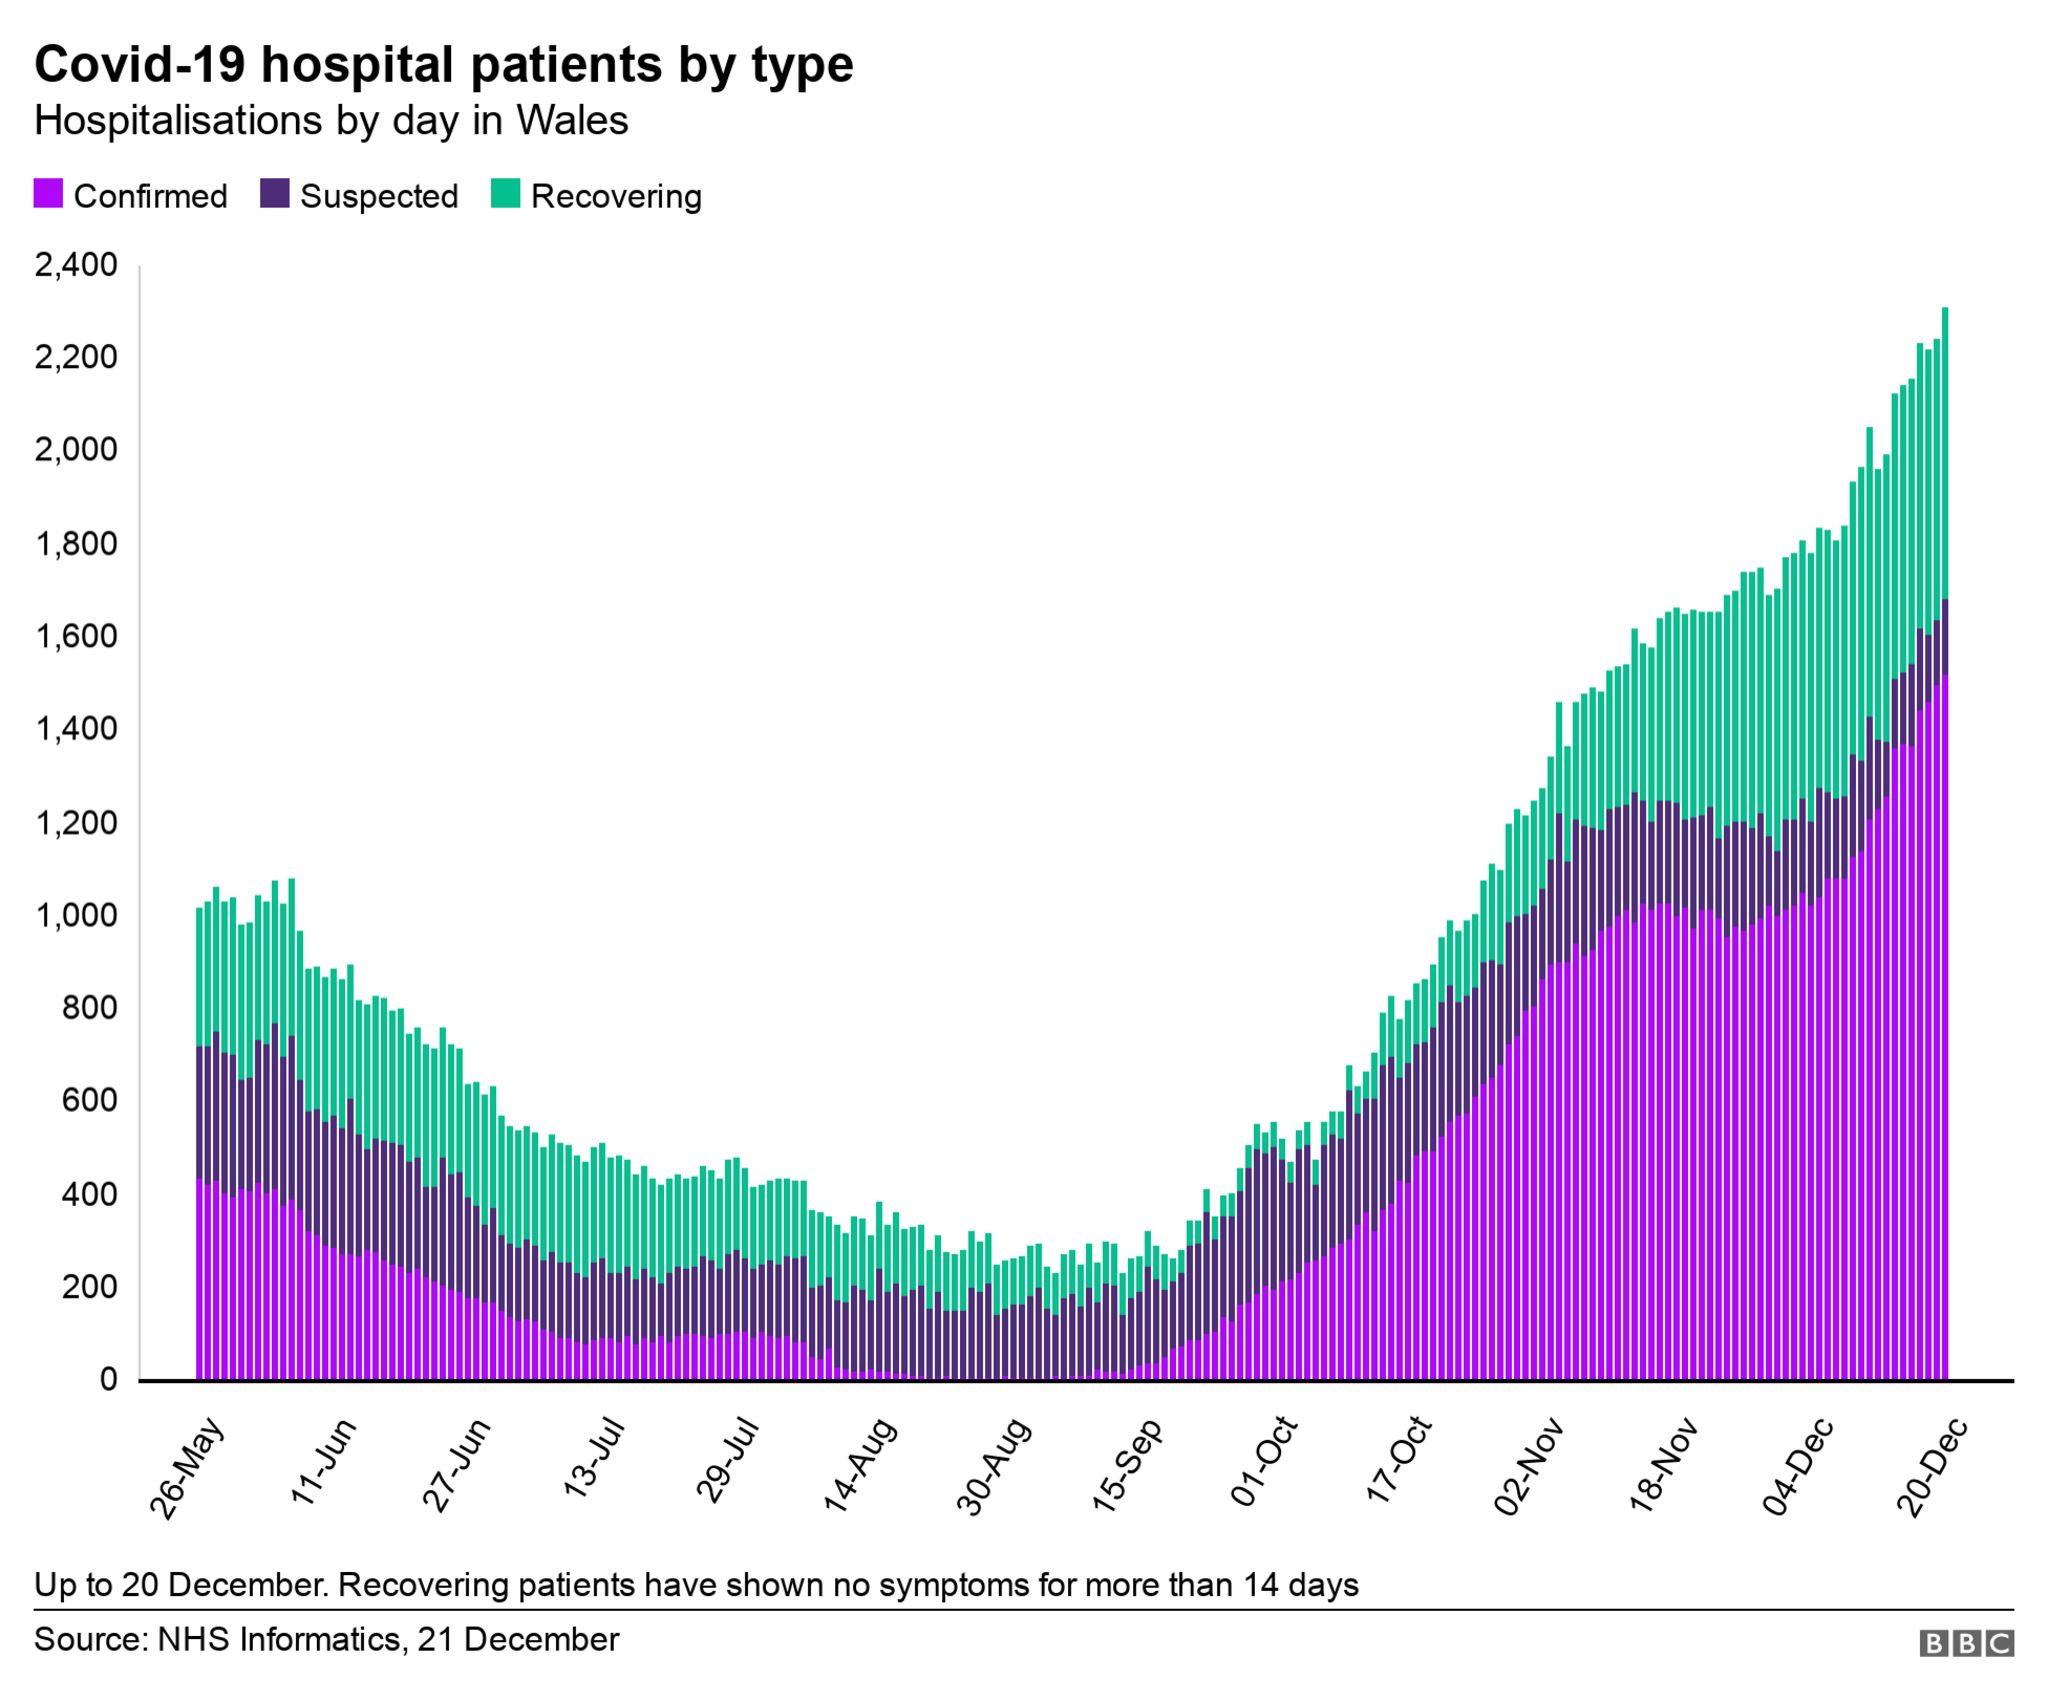 Graph showing Covid hospital admissions in Wales